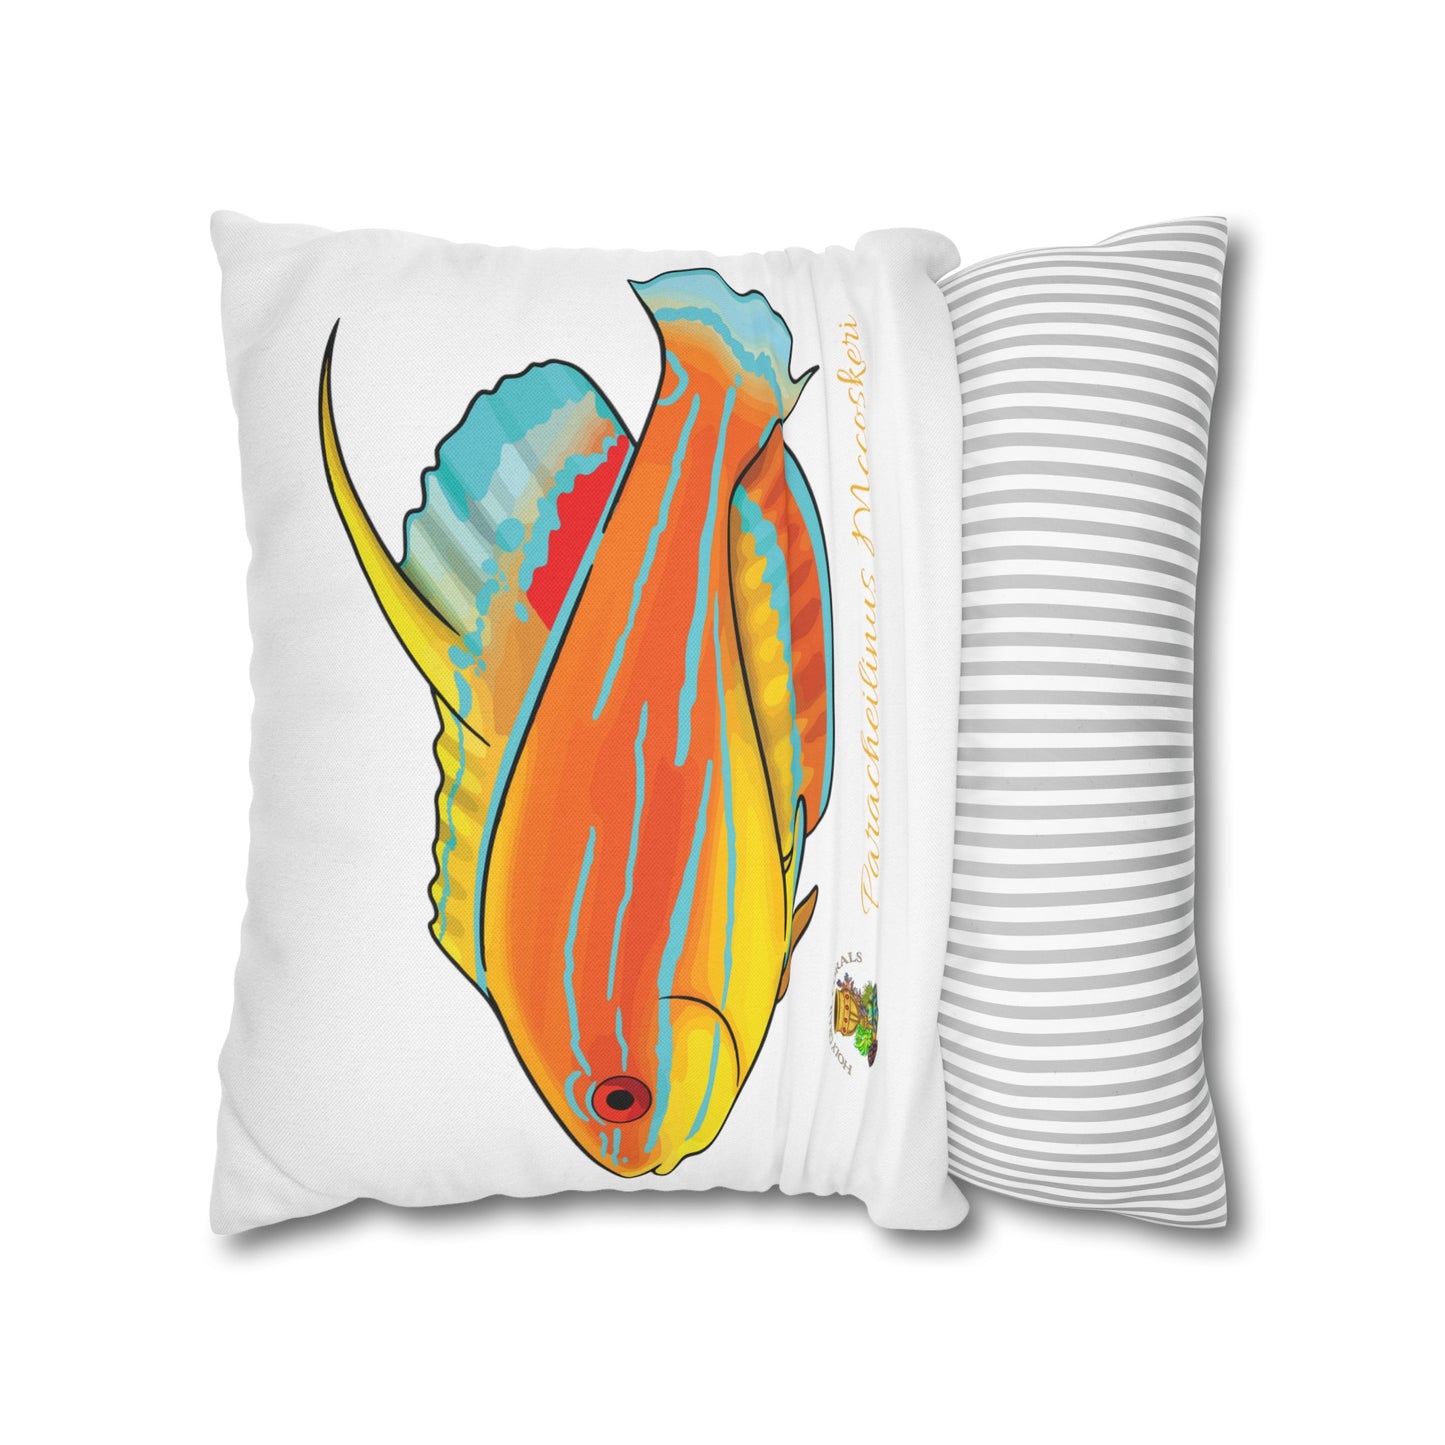 McCosker's Wrasse Square Pillow Cover